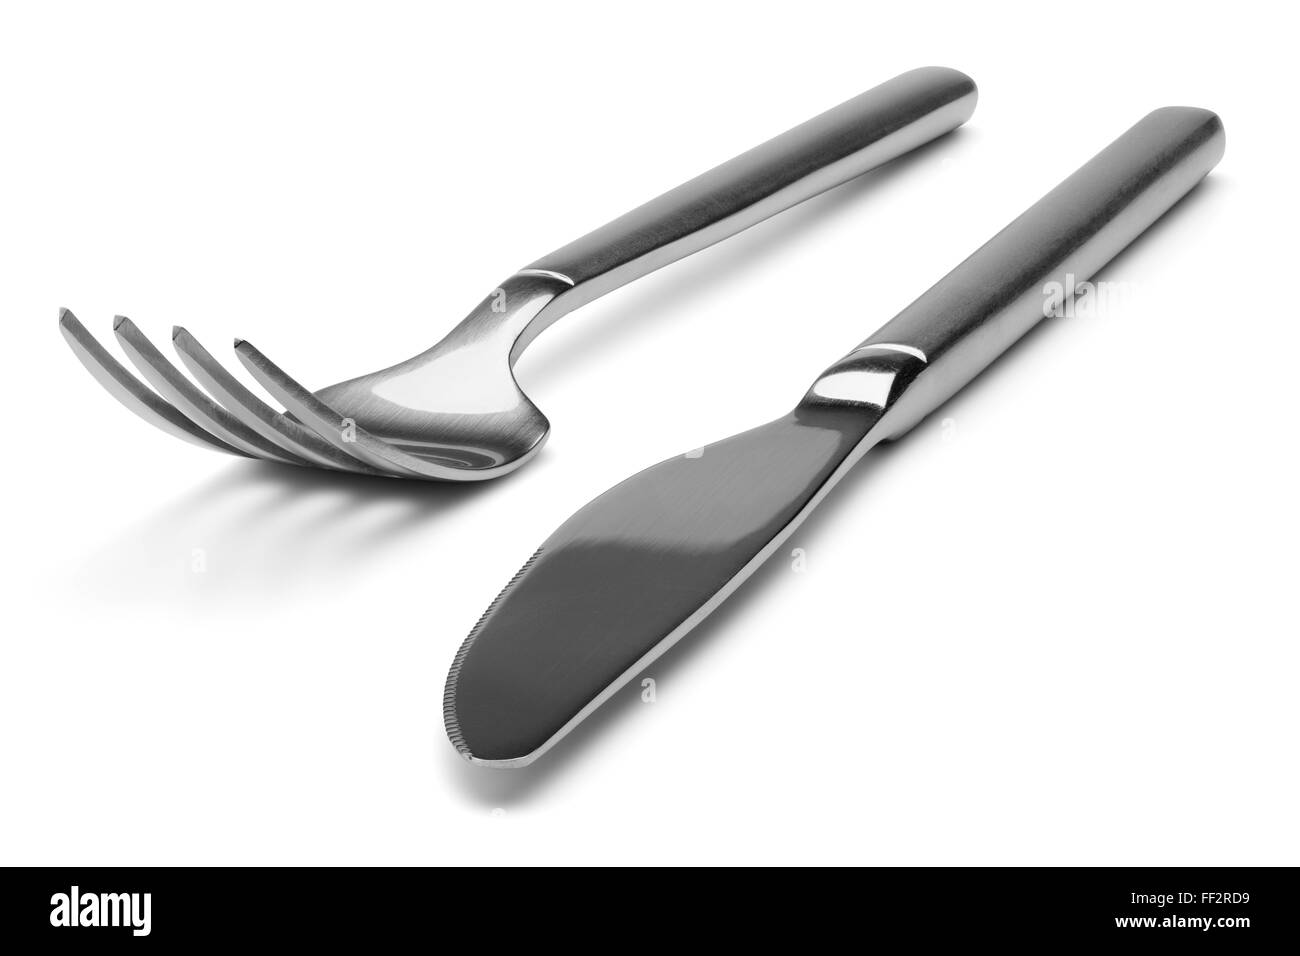 Knife and fork, isolated on the white background, clipping path included. Stock Photo